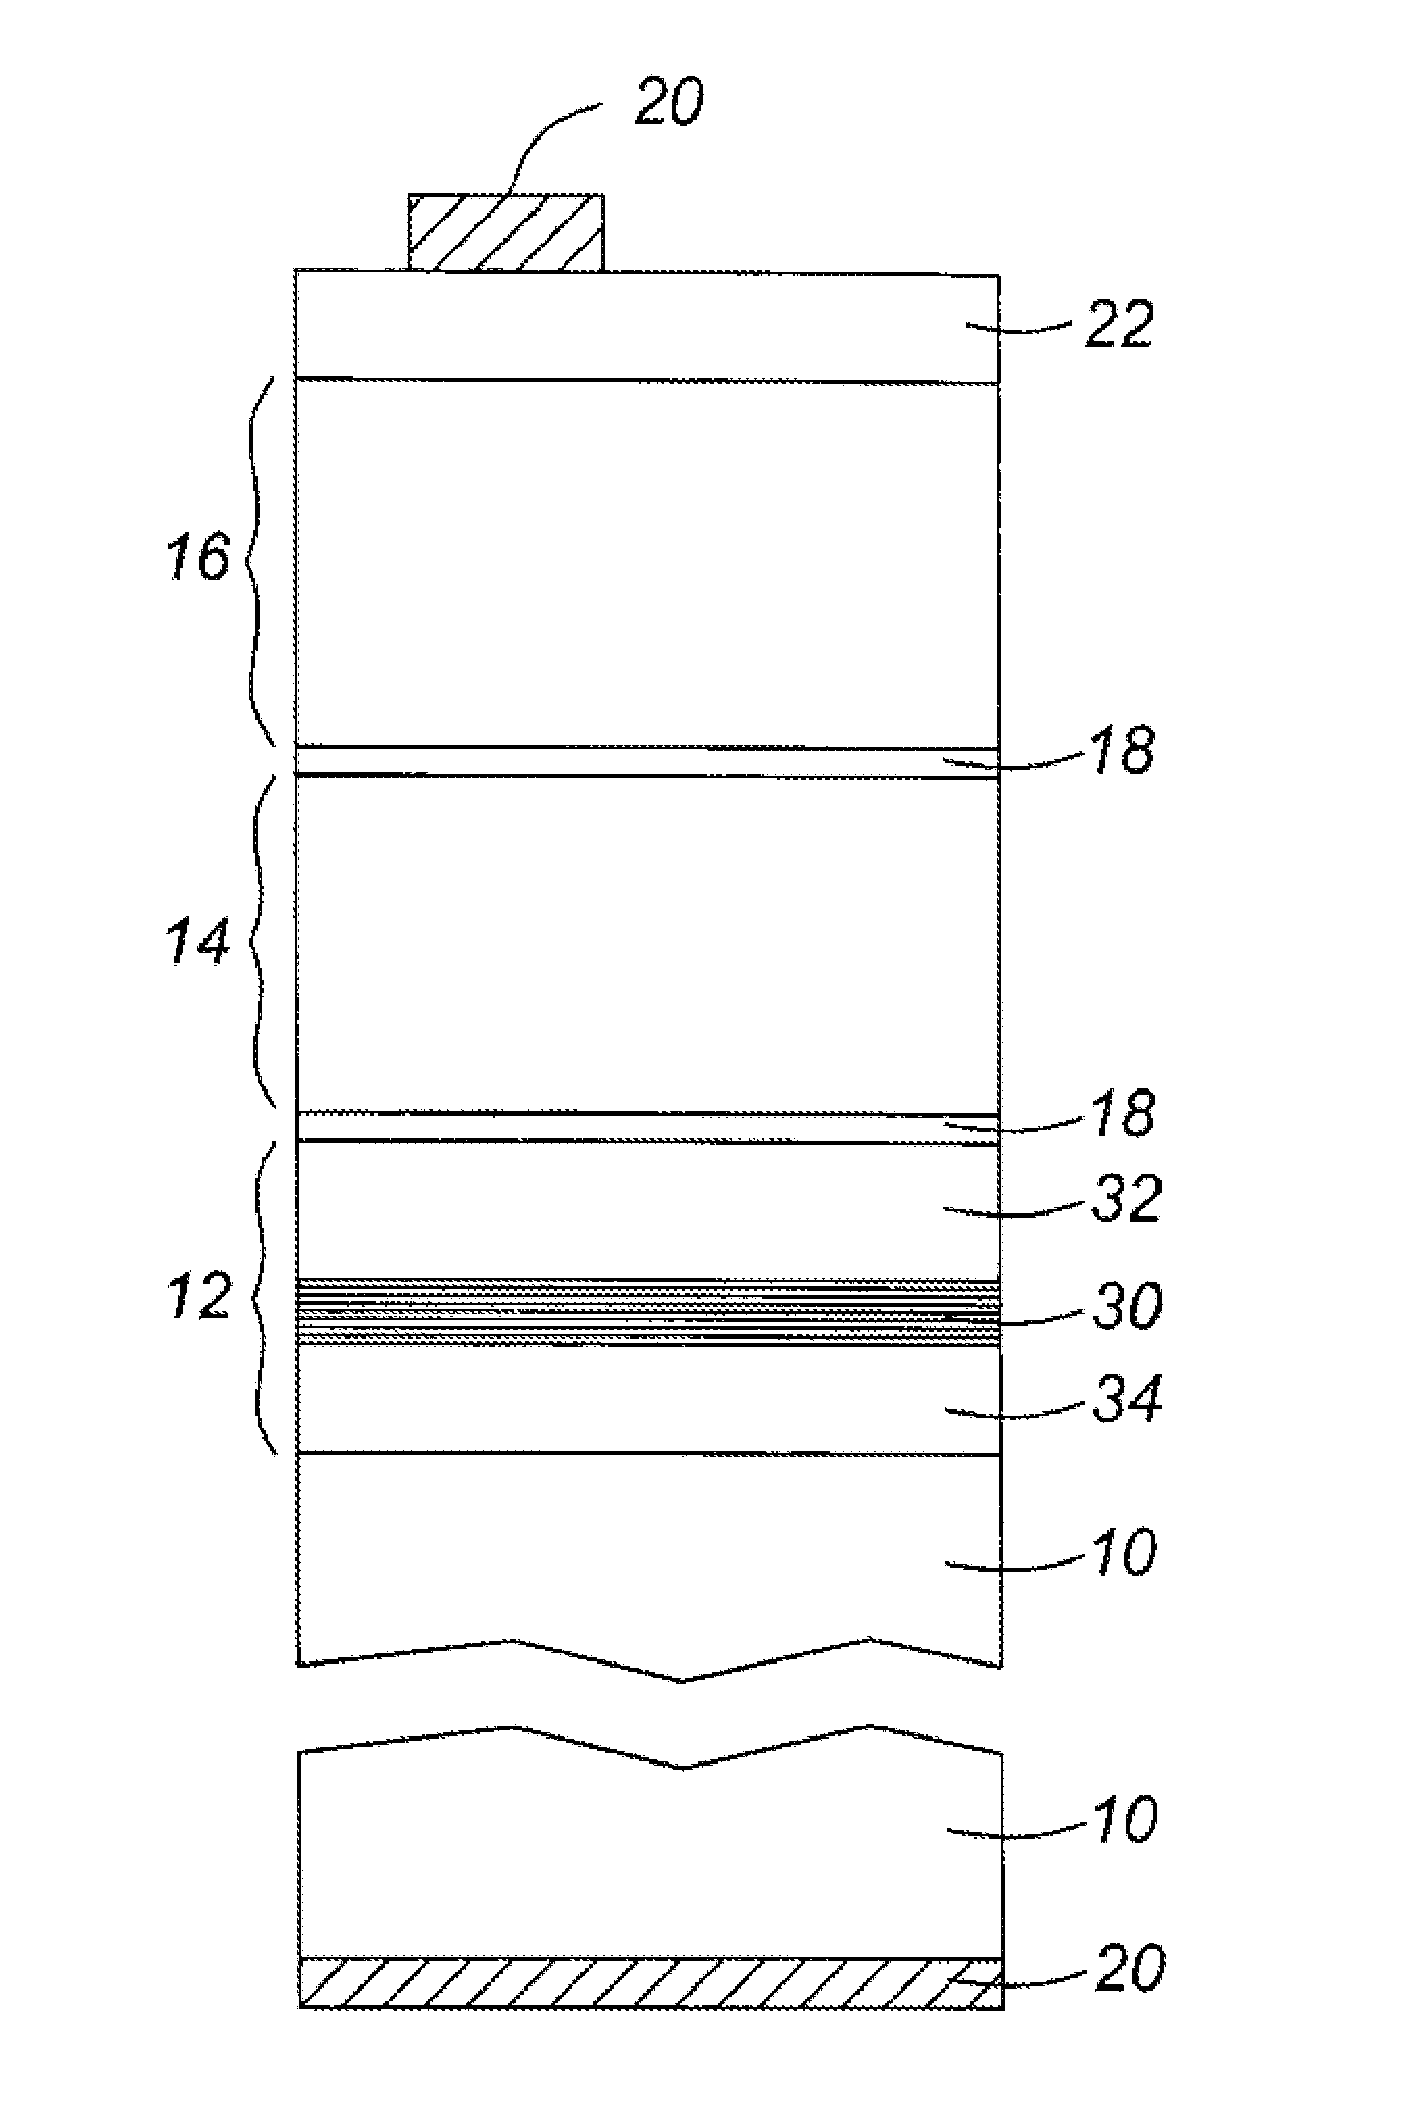 Photovoltaic junction for a solar cell